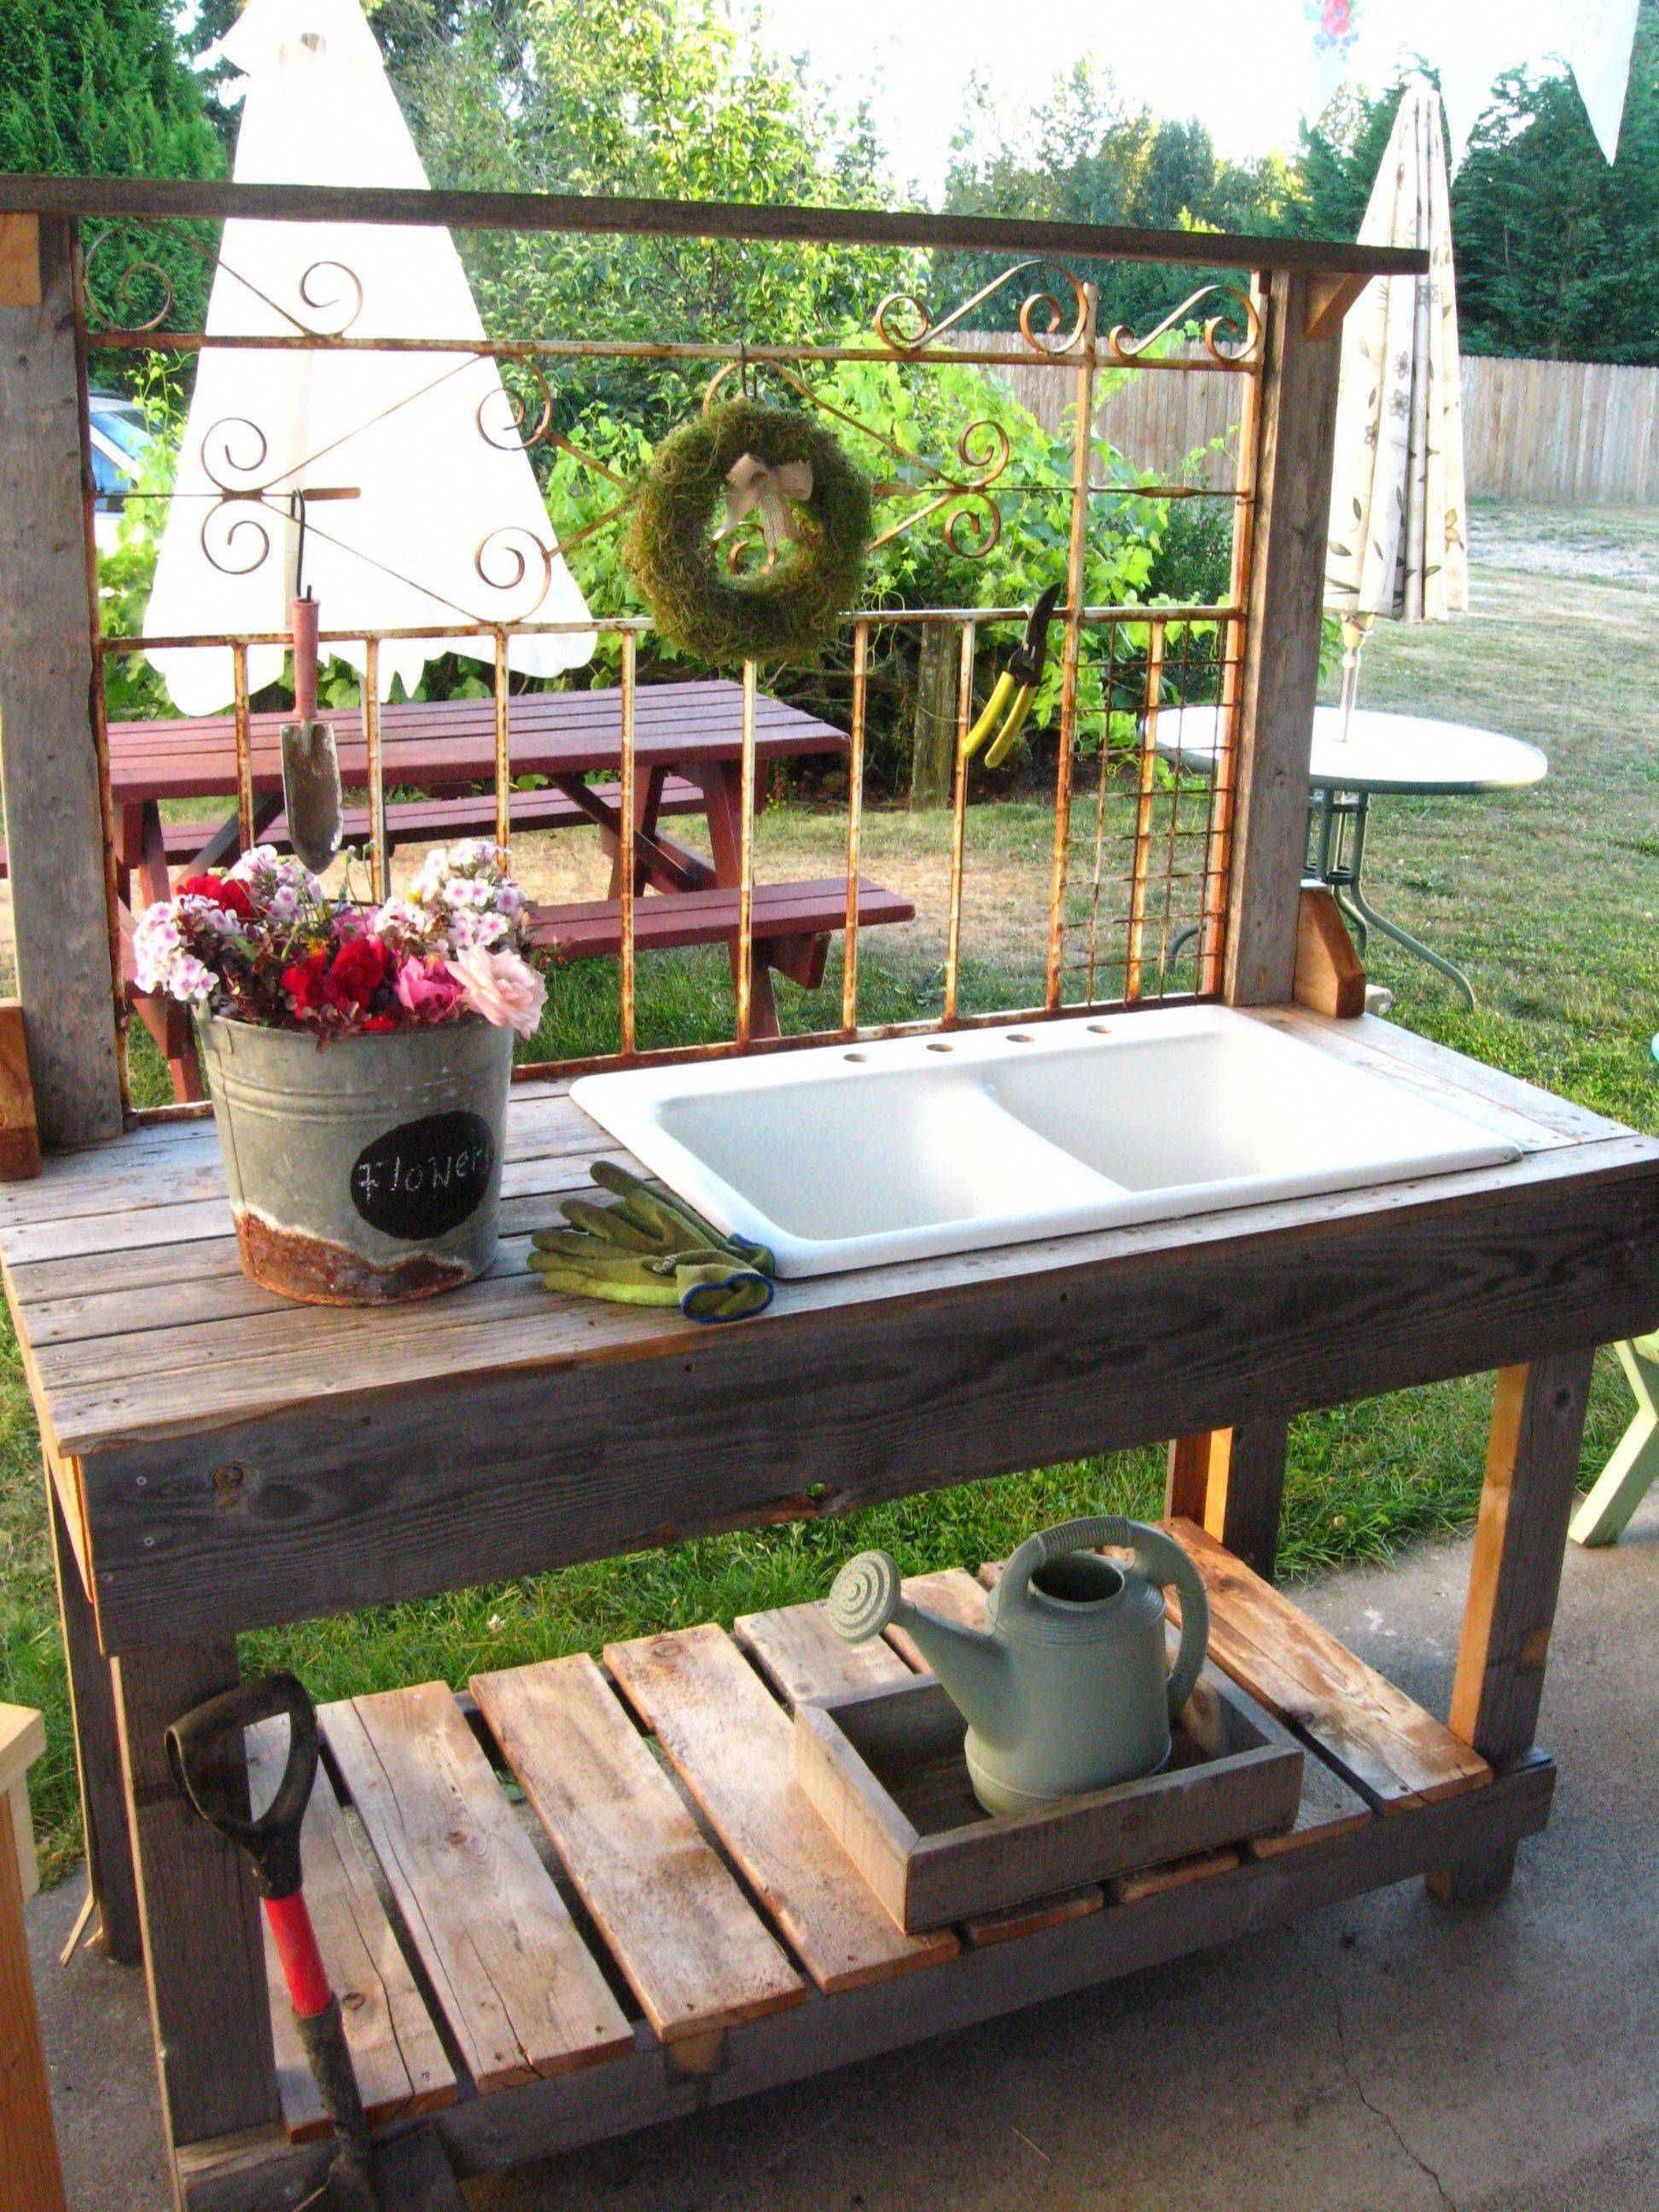 Outdoor Potting Bench